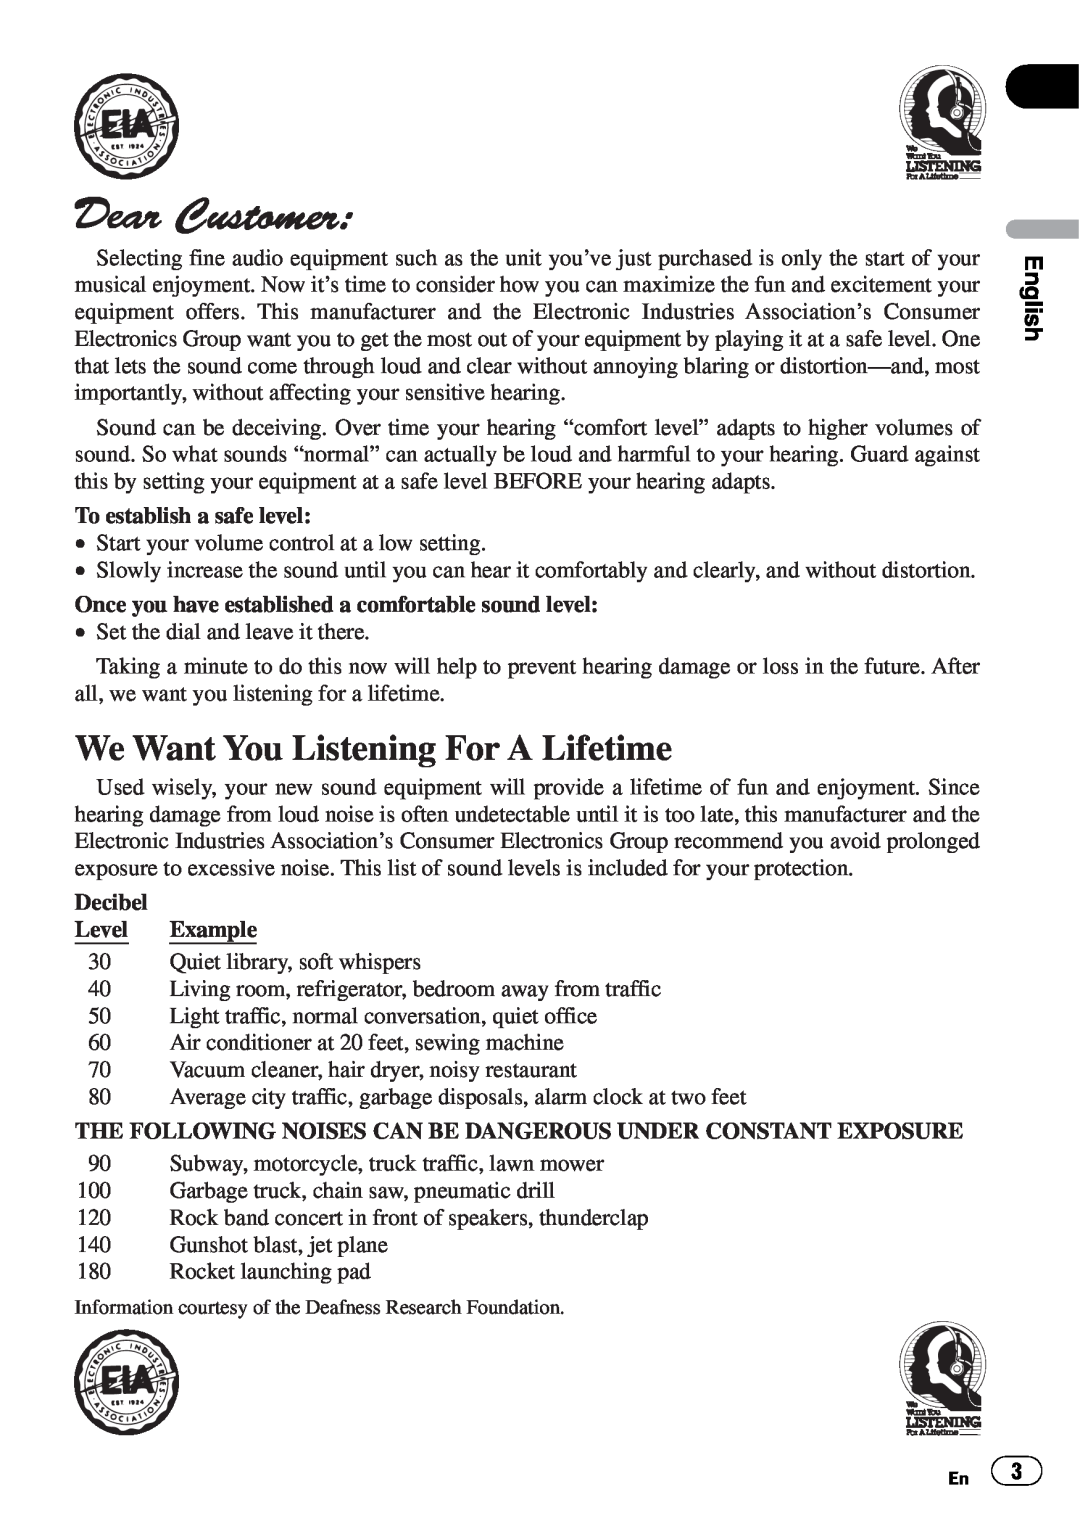 Pioneer DEQ-P8000 operation manual We Want You Listening For A Lifetime, To establish a safe level, Decibel Level Example 